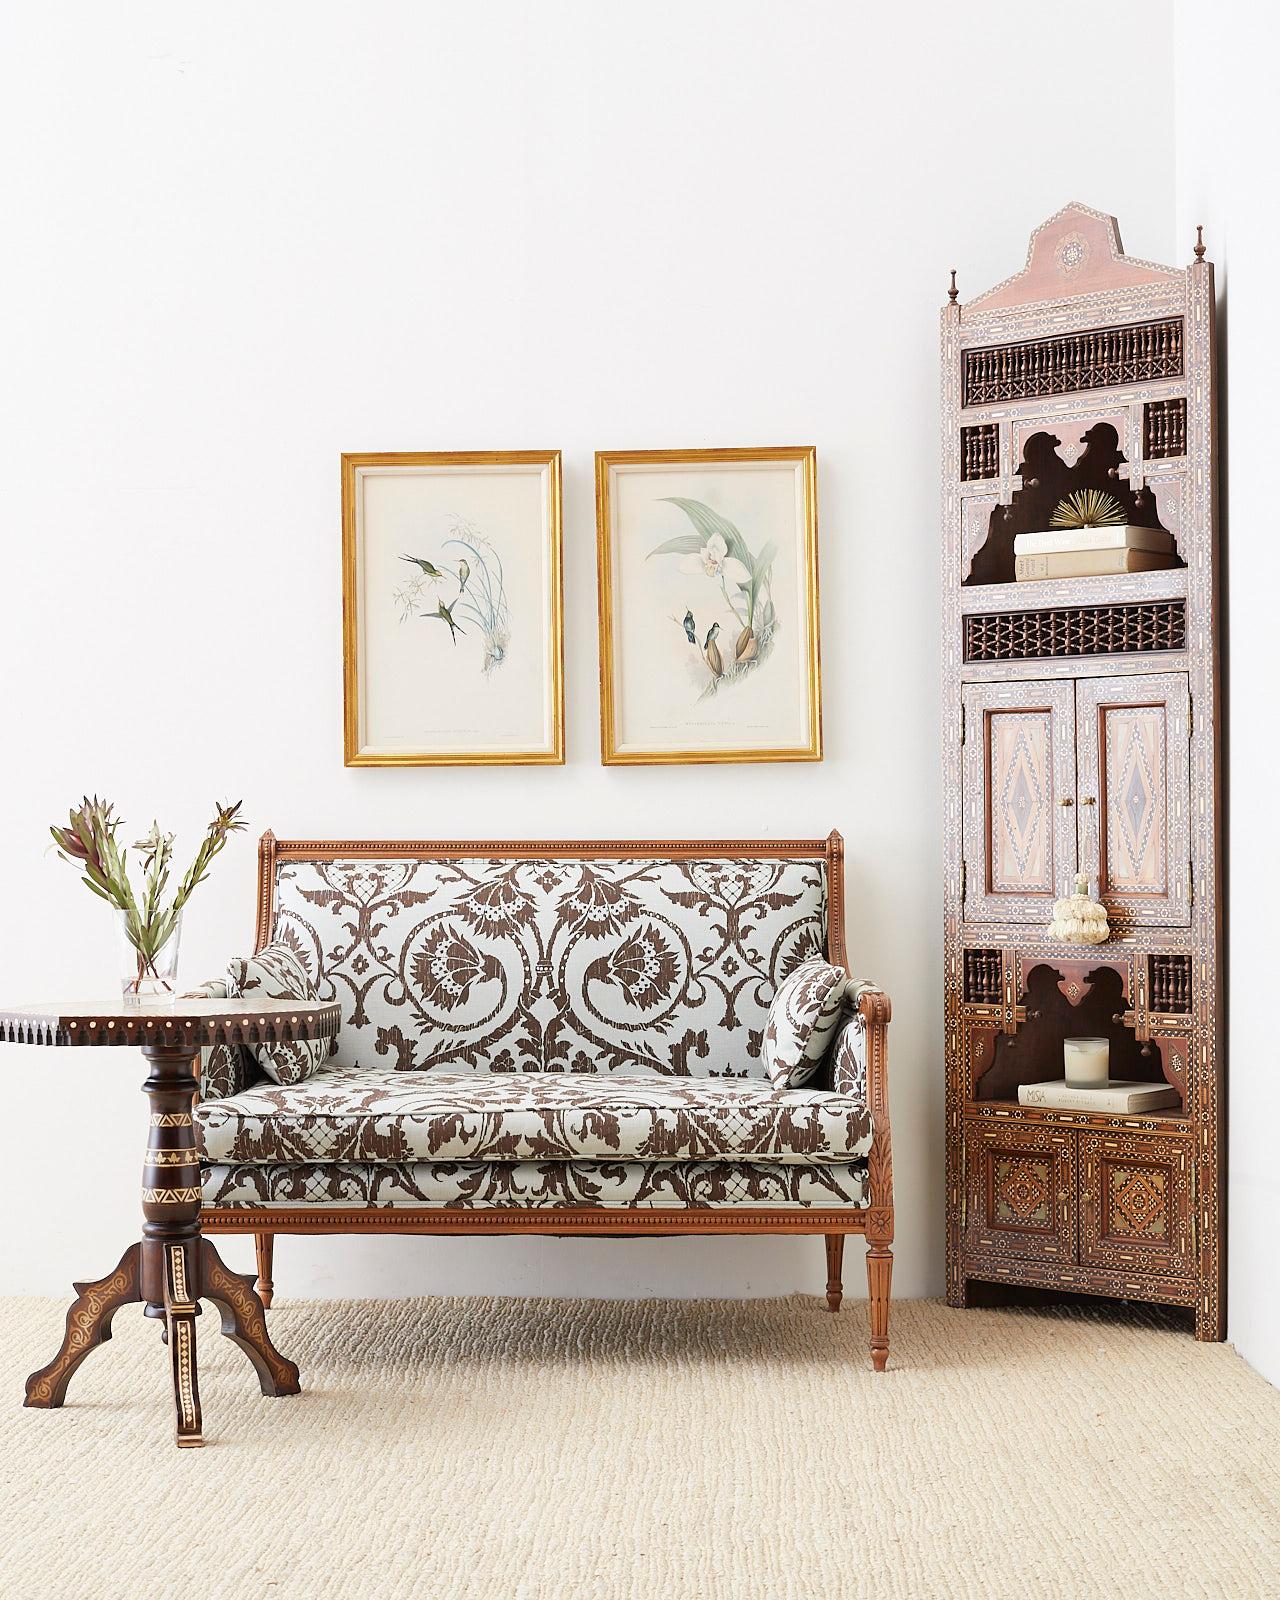 Fantastic French Louis XVI neoclassical style settee or canape featuring a recent modern upholstery redux with a Fortuny style print in linen. The entire frame is upholstered and has a loose seat cushion with two throw pillows. The beautifully